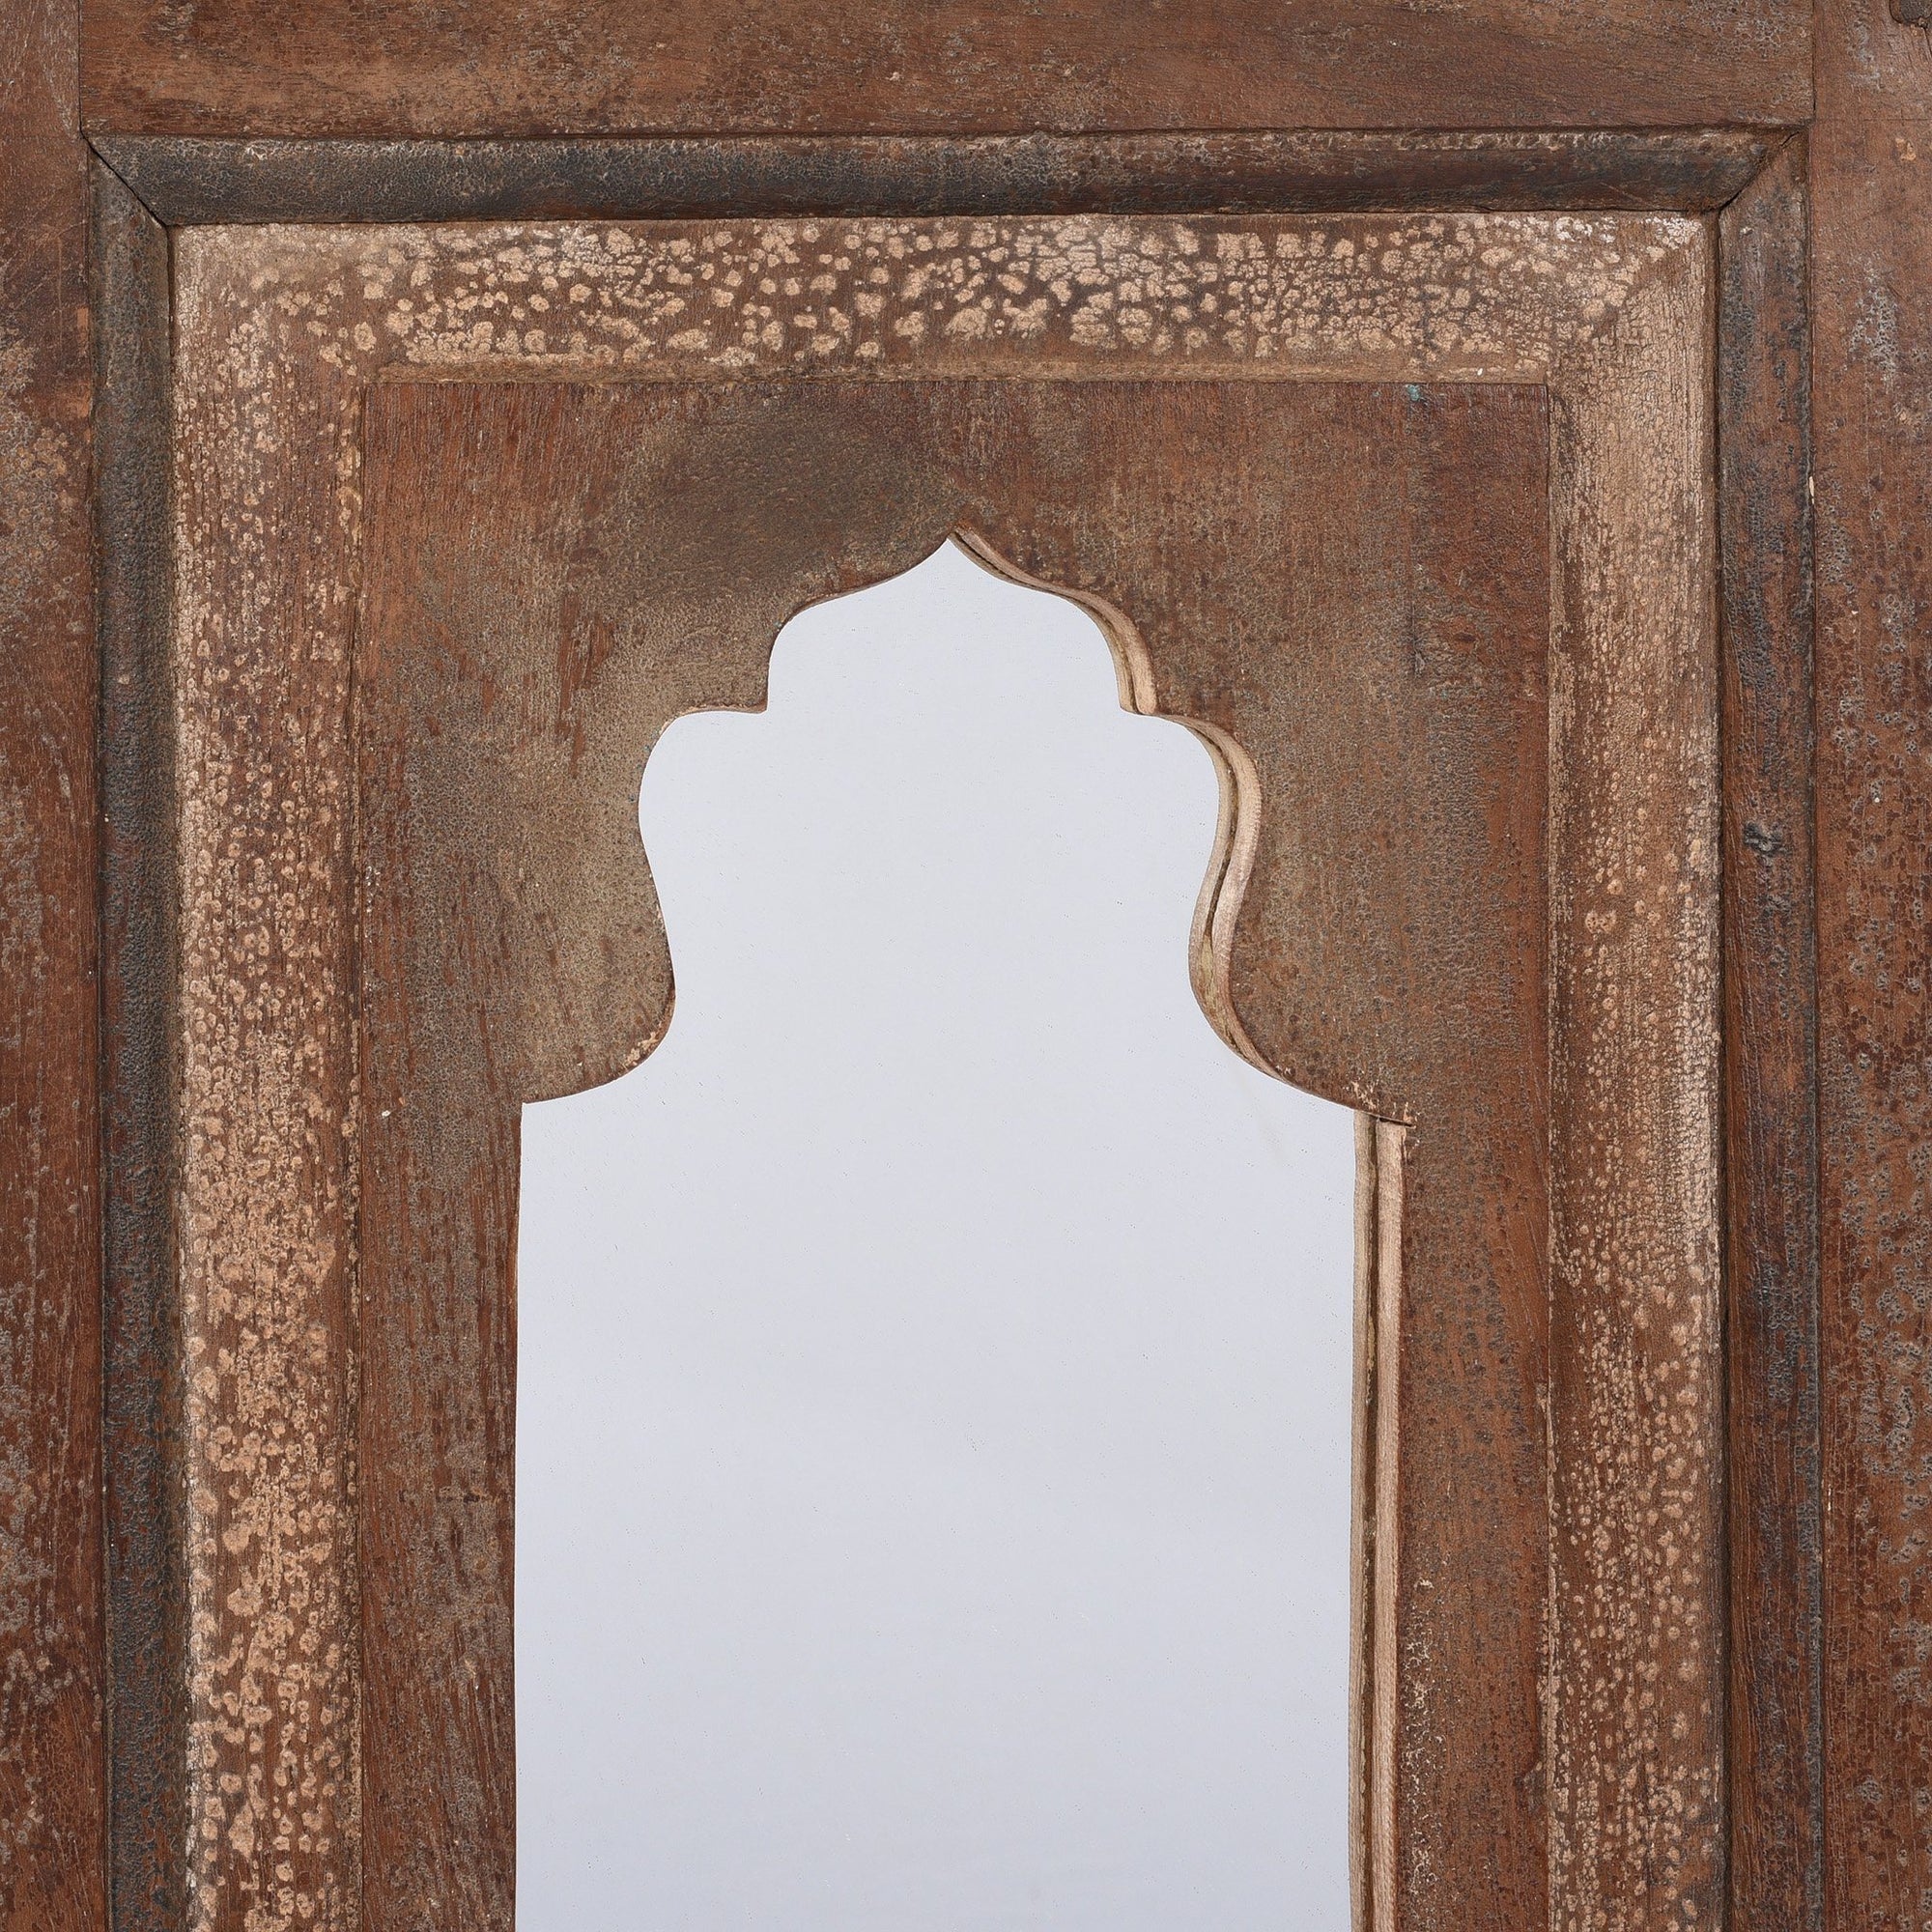 Small Vintage Distressed Indian Mihrab Mirror Made From Old Teak Wood | Indigo Antiques